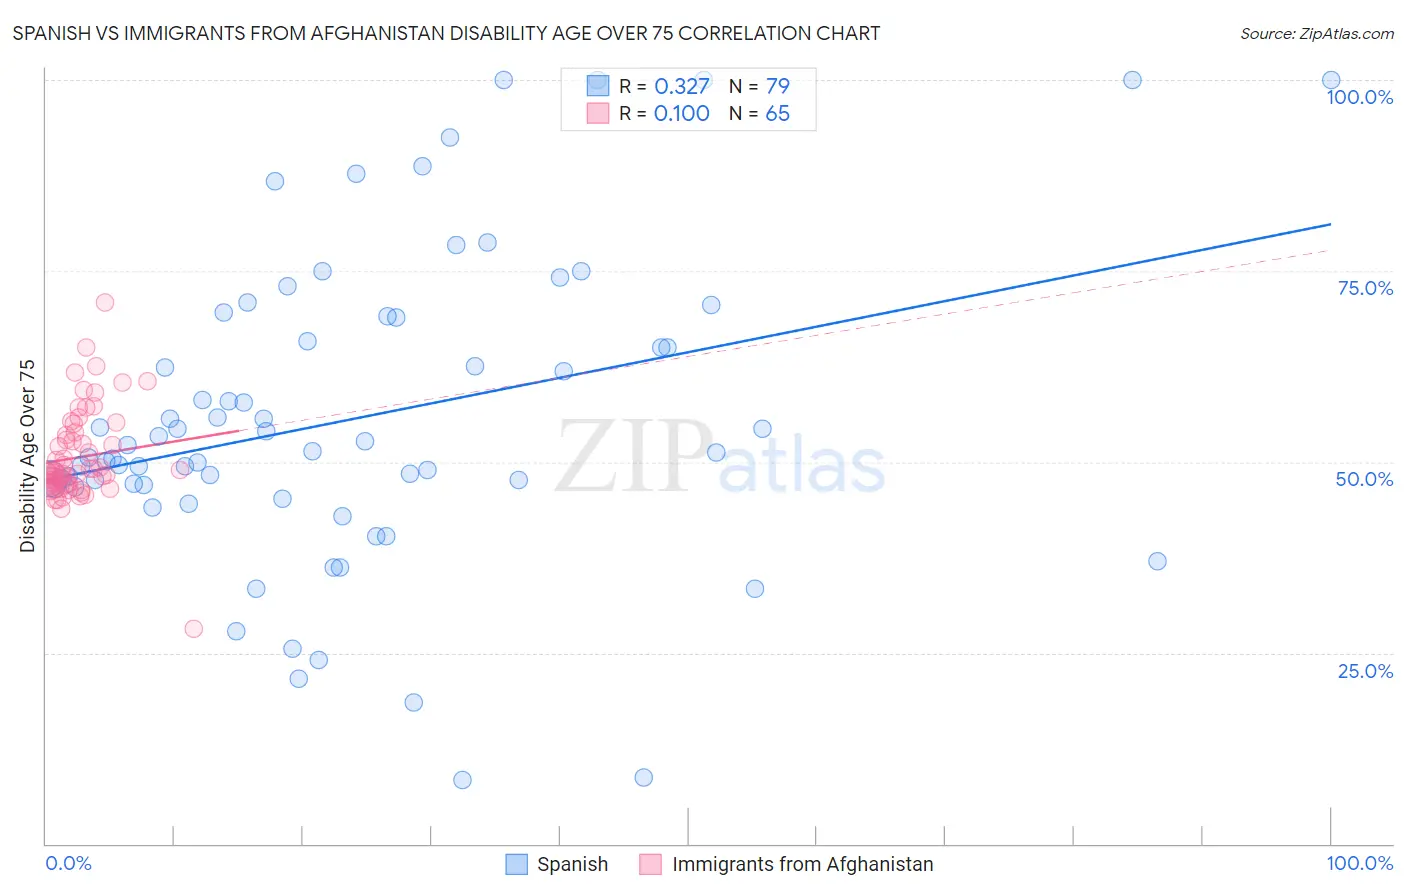 Spanish vs Immigrants from Afghanistan Disability Age Over 75